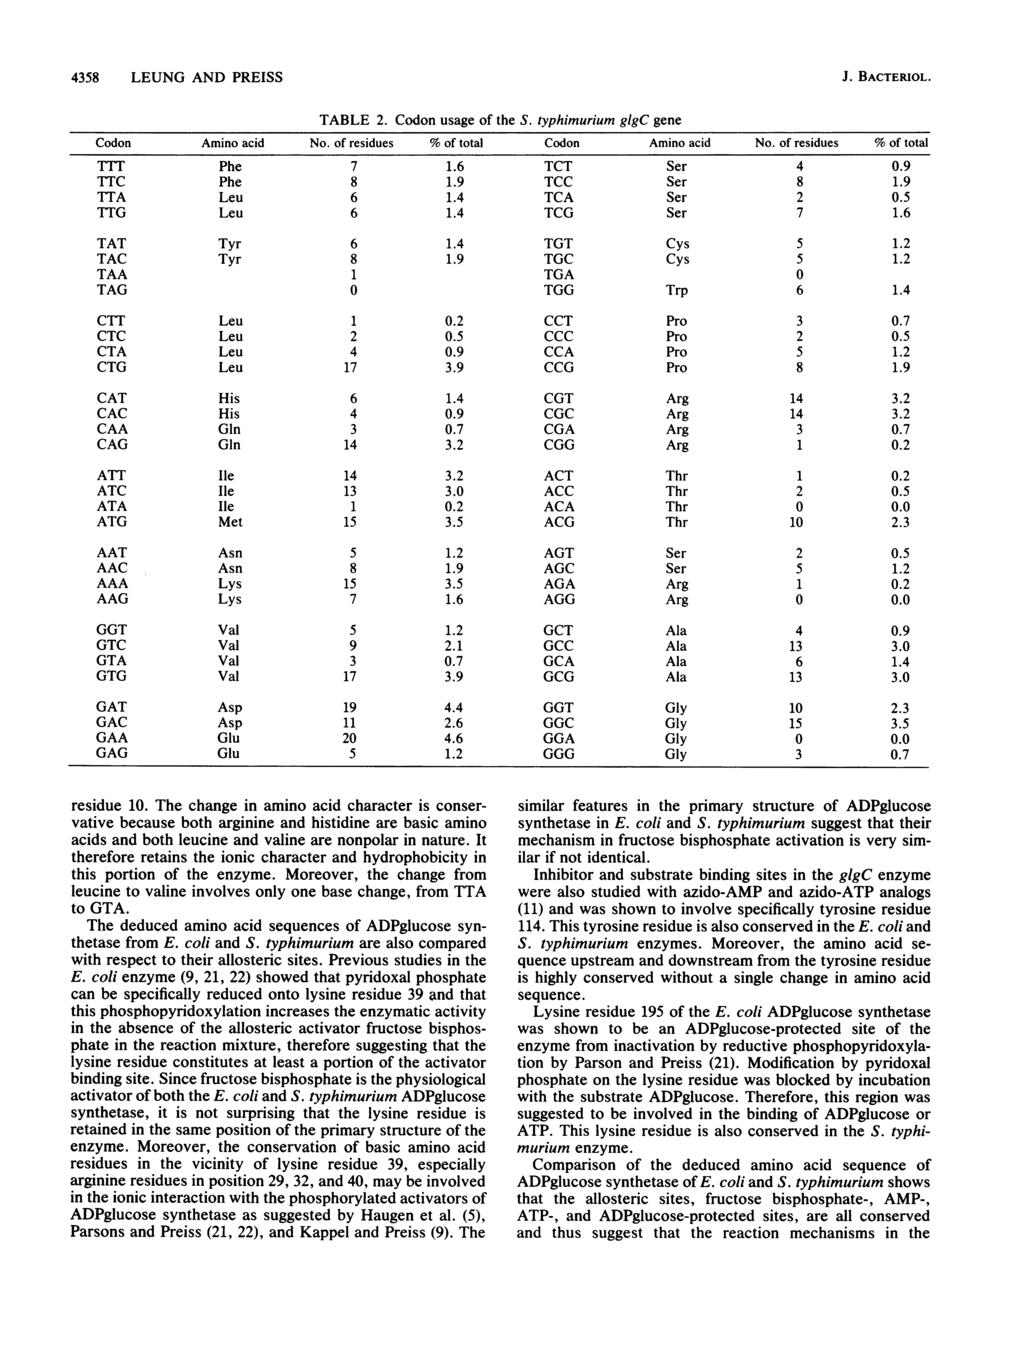 4358 LEUNG AND PREISS J. BACTERIOL. TABLE 2. Codon usage of the S. typhimurium glgc gene Codon Amino acid No. of residues % of total Codon Amino acid No. of residues % of total TTT Phe 7 1.